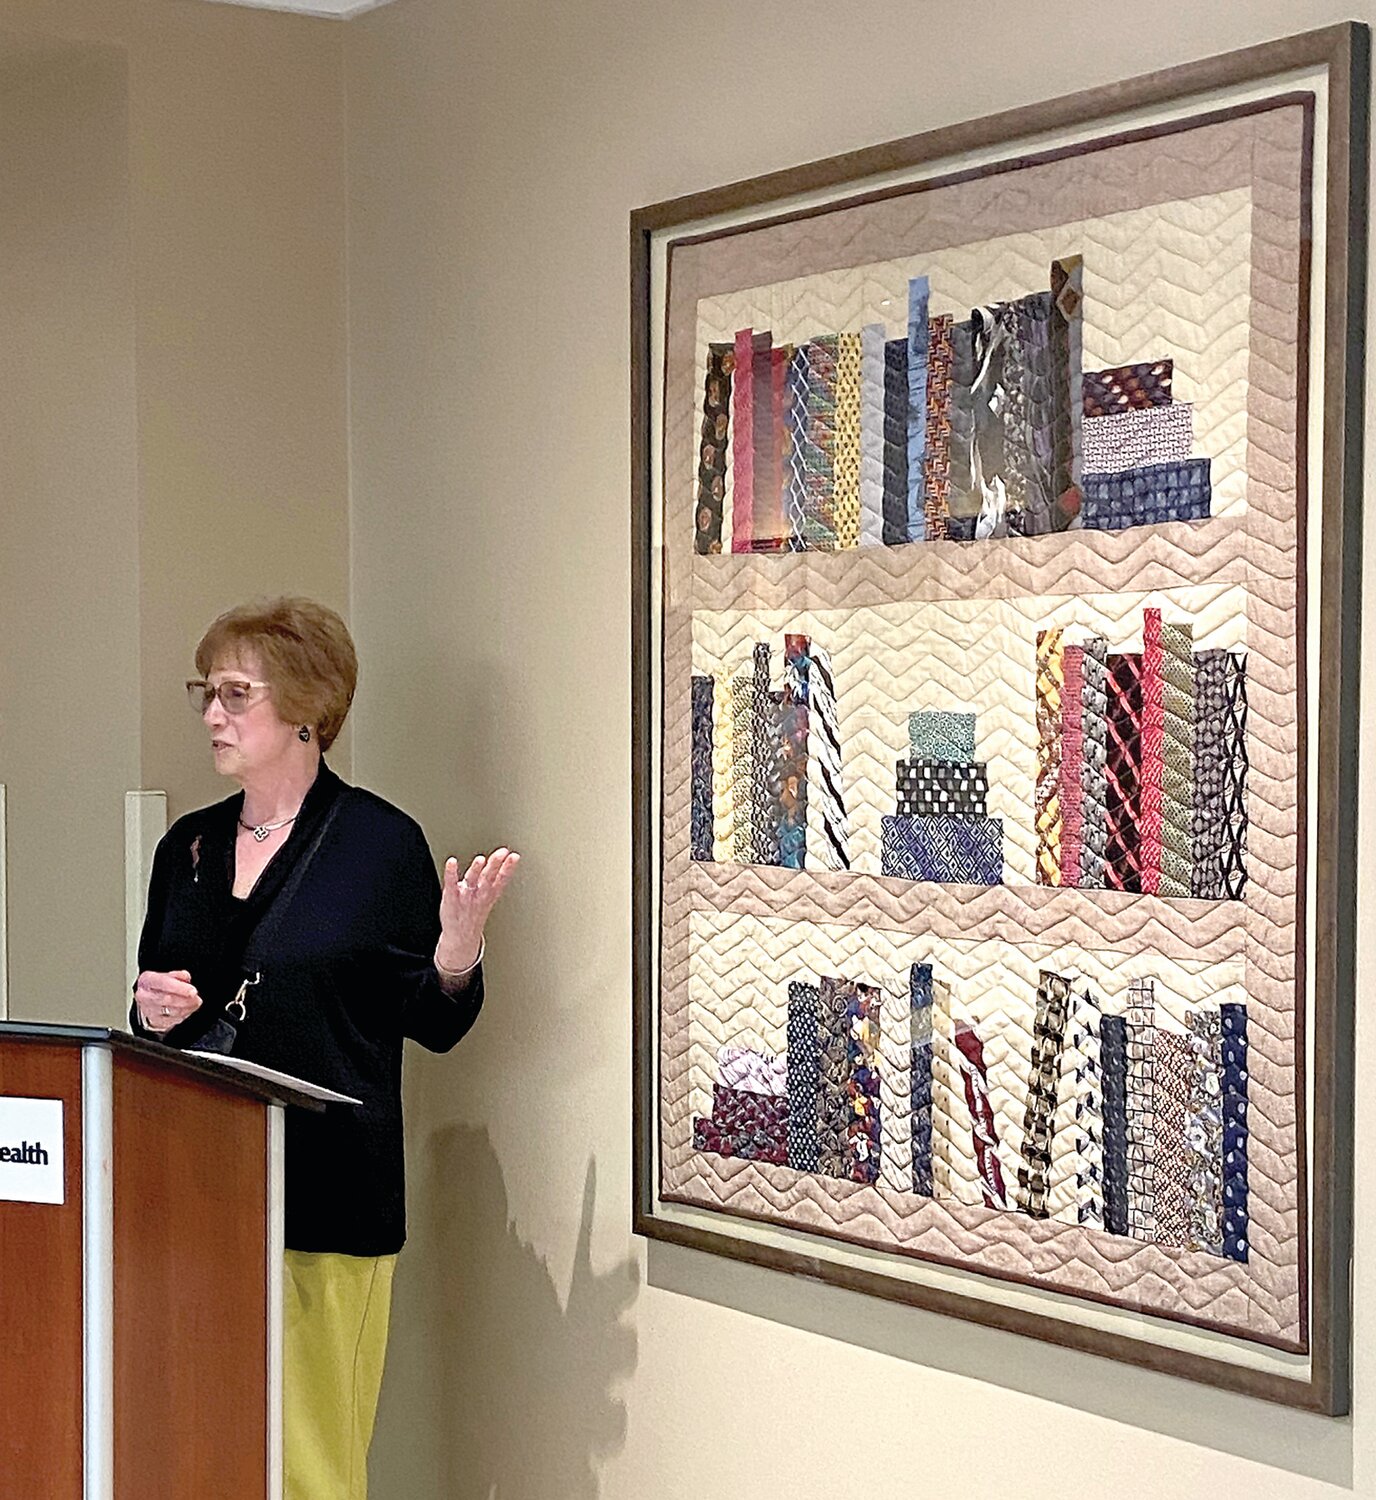 Gwyn Walton, a member of The Tightly Bound Book Group, shared what the special remembrance quilt made by the club meant to her during a poignant presentation at Doylestown Hospital March 14.